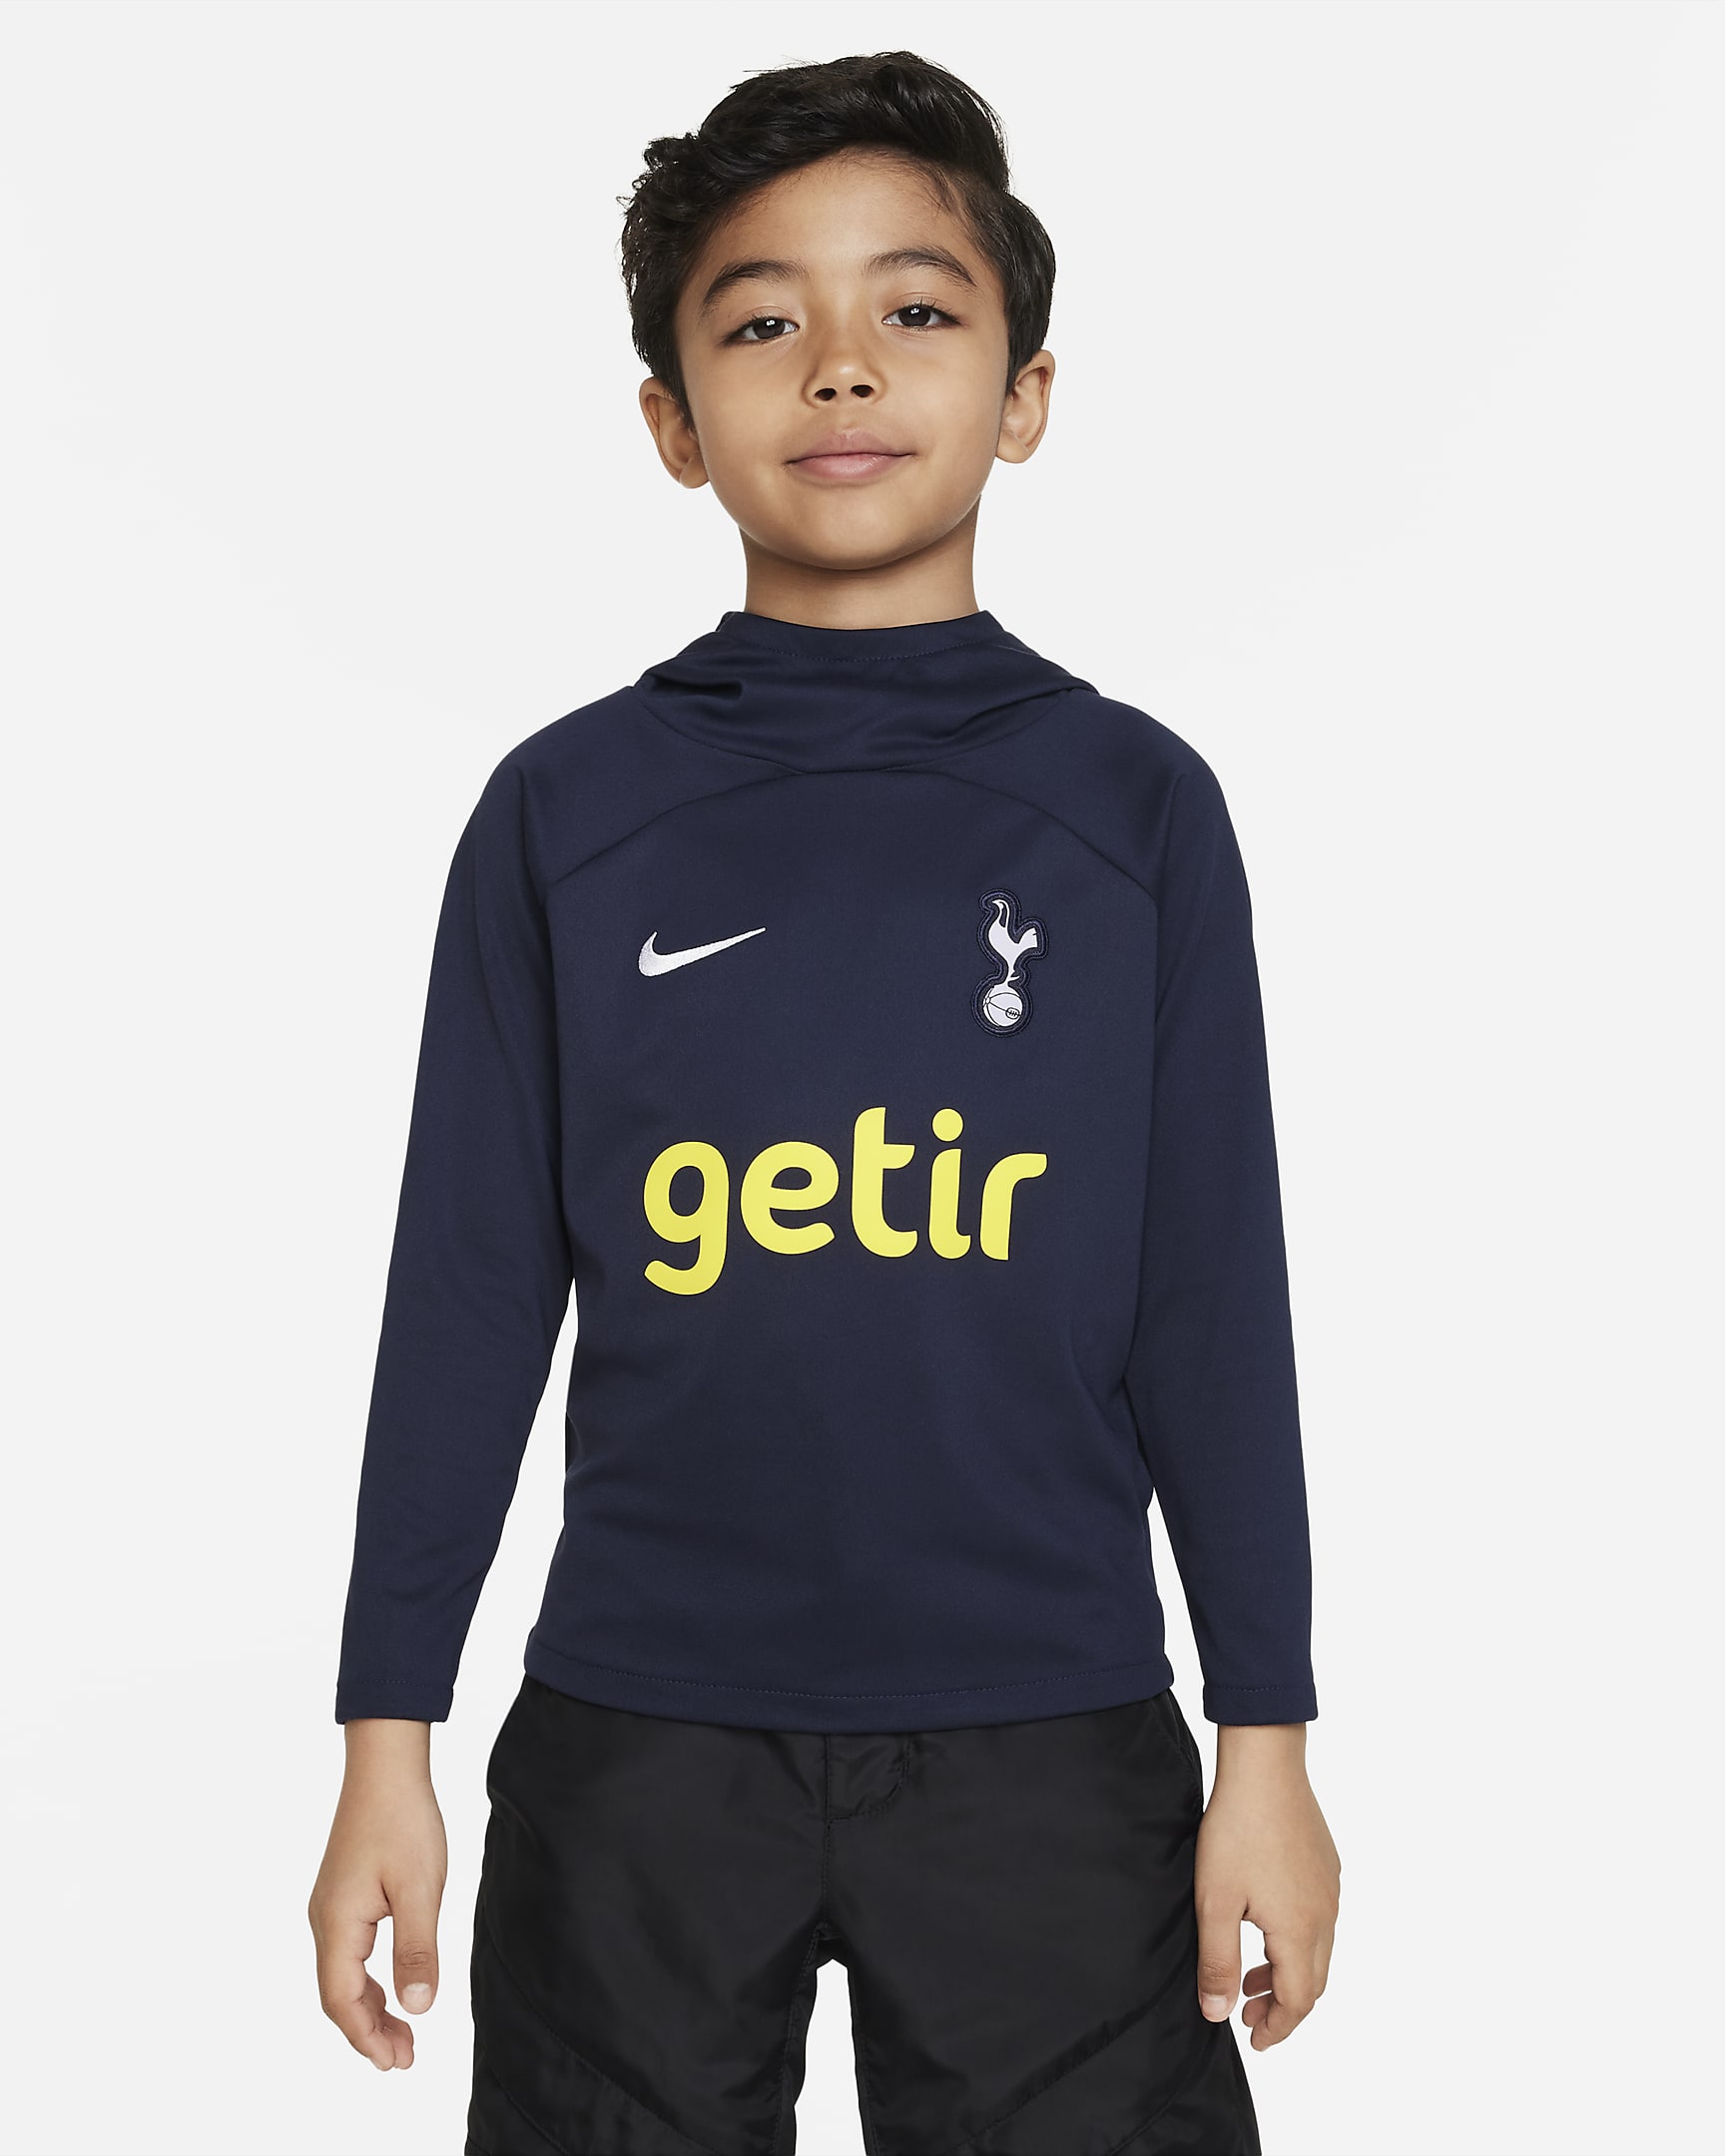 Tottenham Hotspur Academy Pro Younger Kids' Nike Dri-FIT Pullover ...